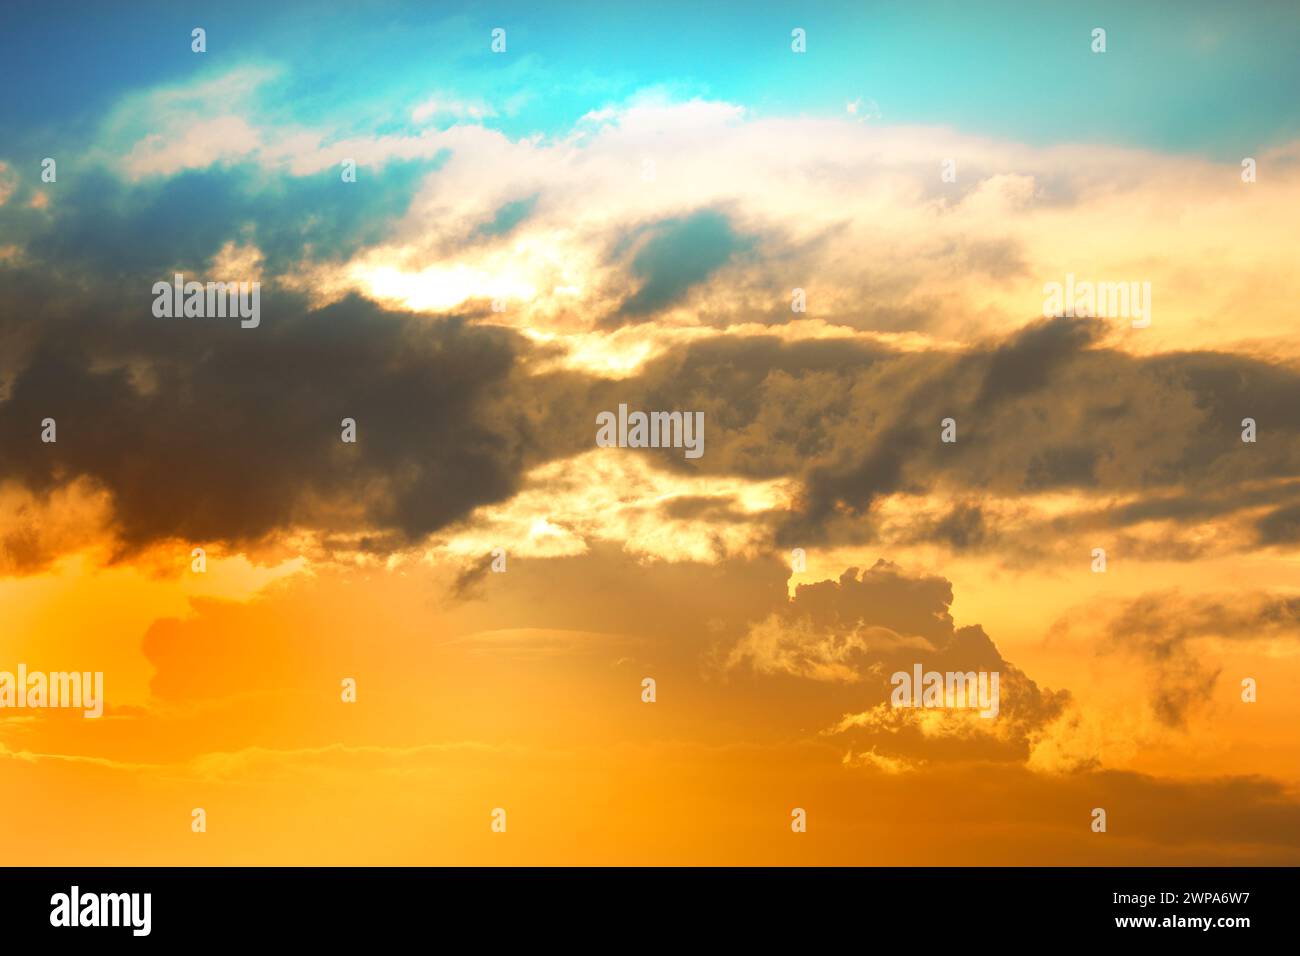 Colorful sky at dawn with cirrus and cumulus clouds Stock Photo